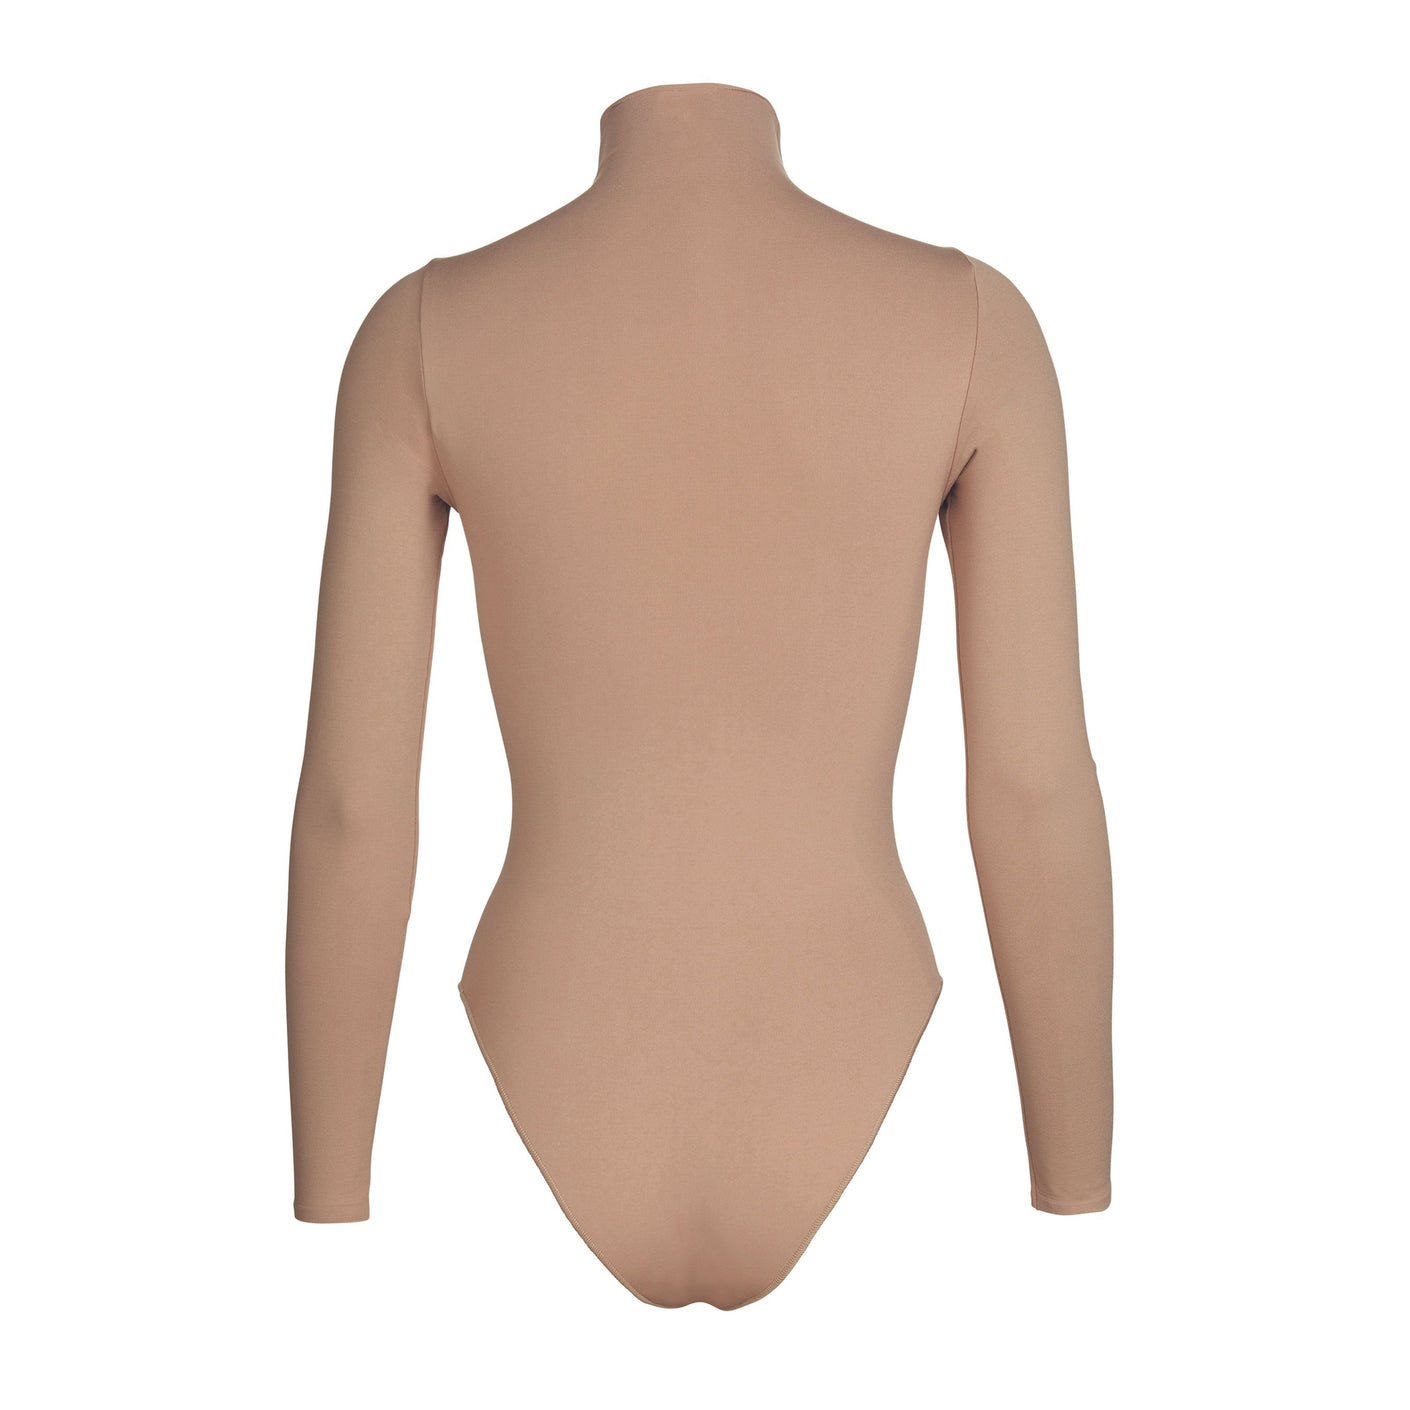 SKIMS Fits Everybody High Neck Bodysuit Sienna NWT Size undefined - $45 New  With Tags - From Samantha